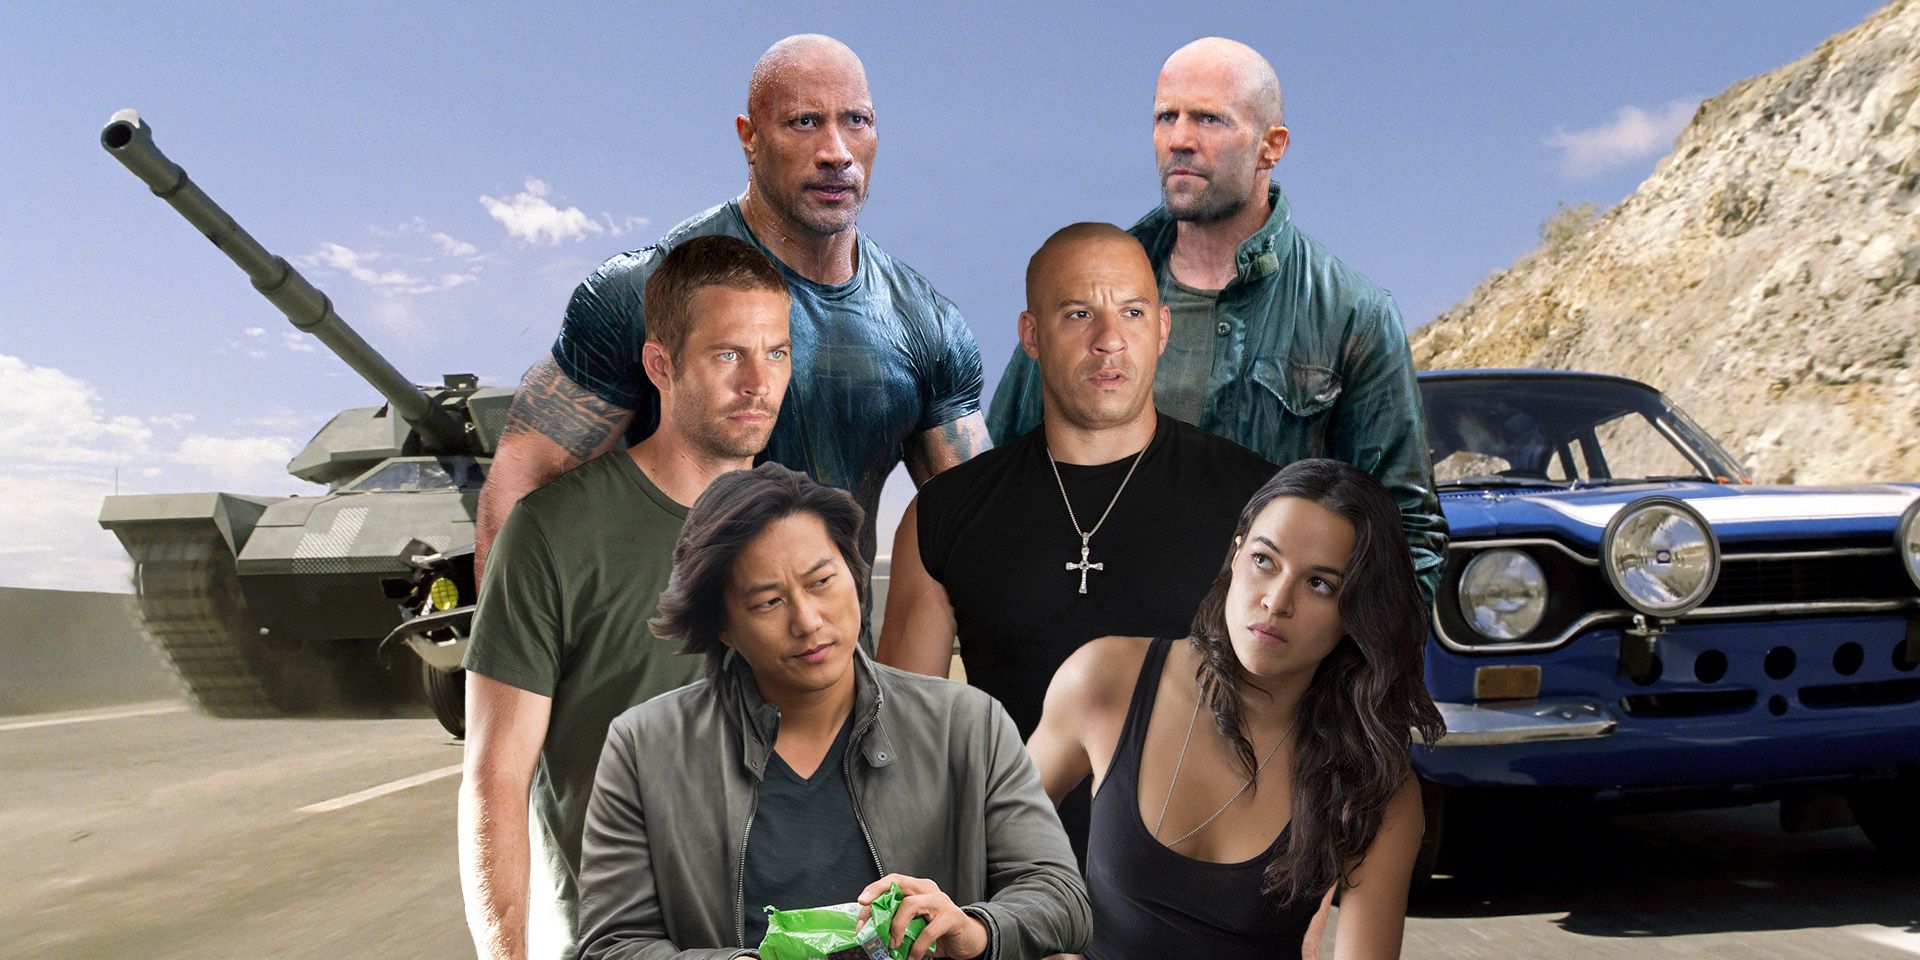 Sevens: Fast, furious and fun